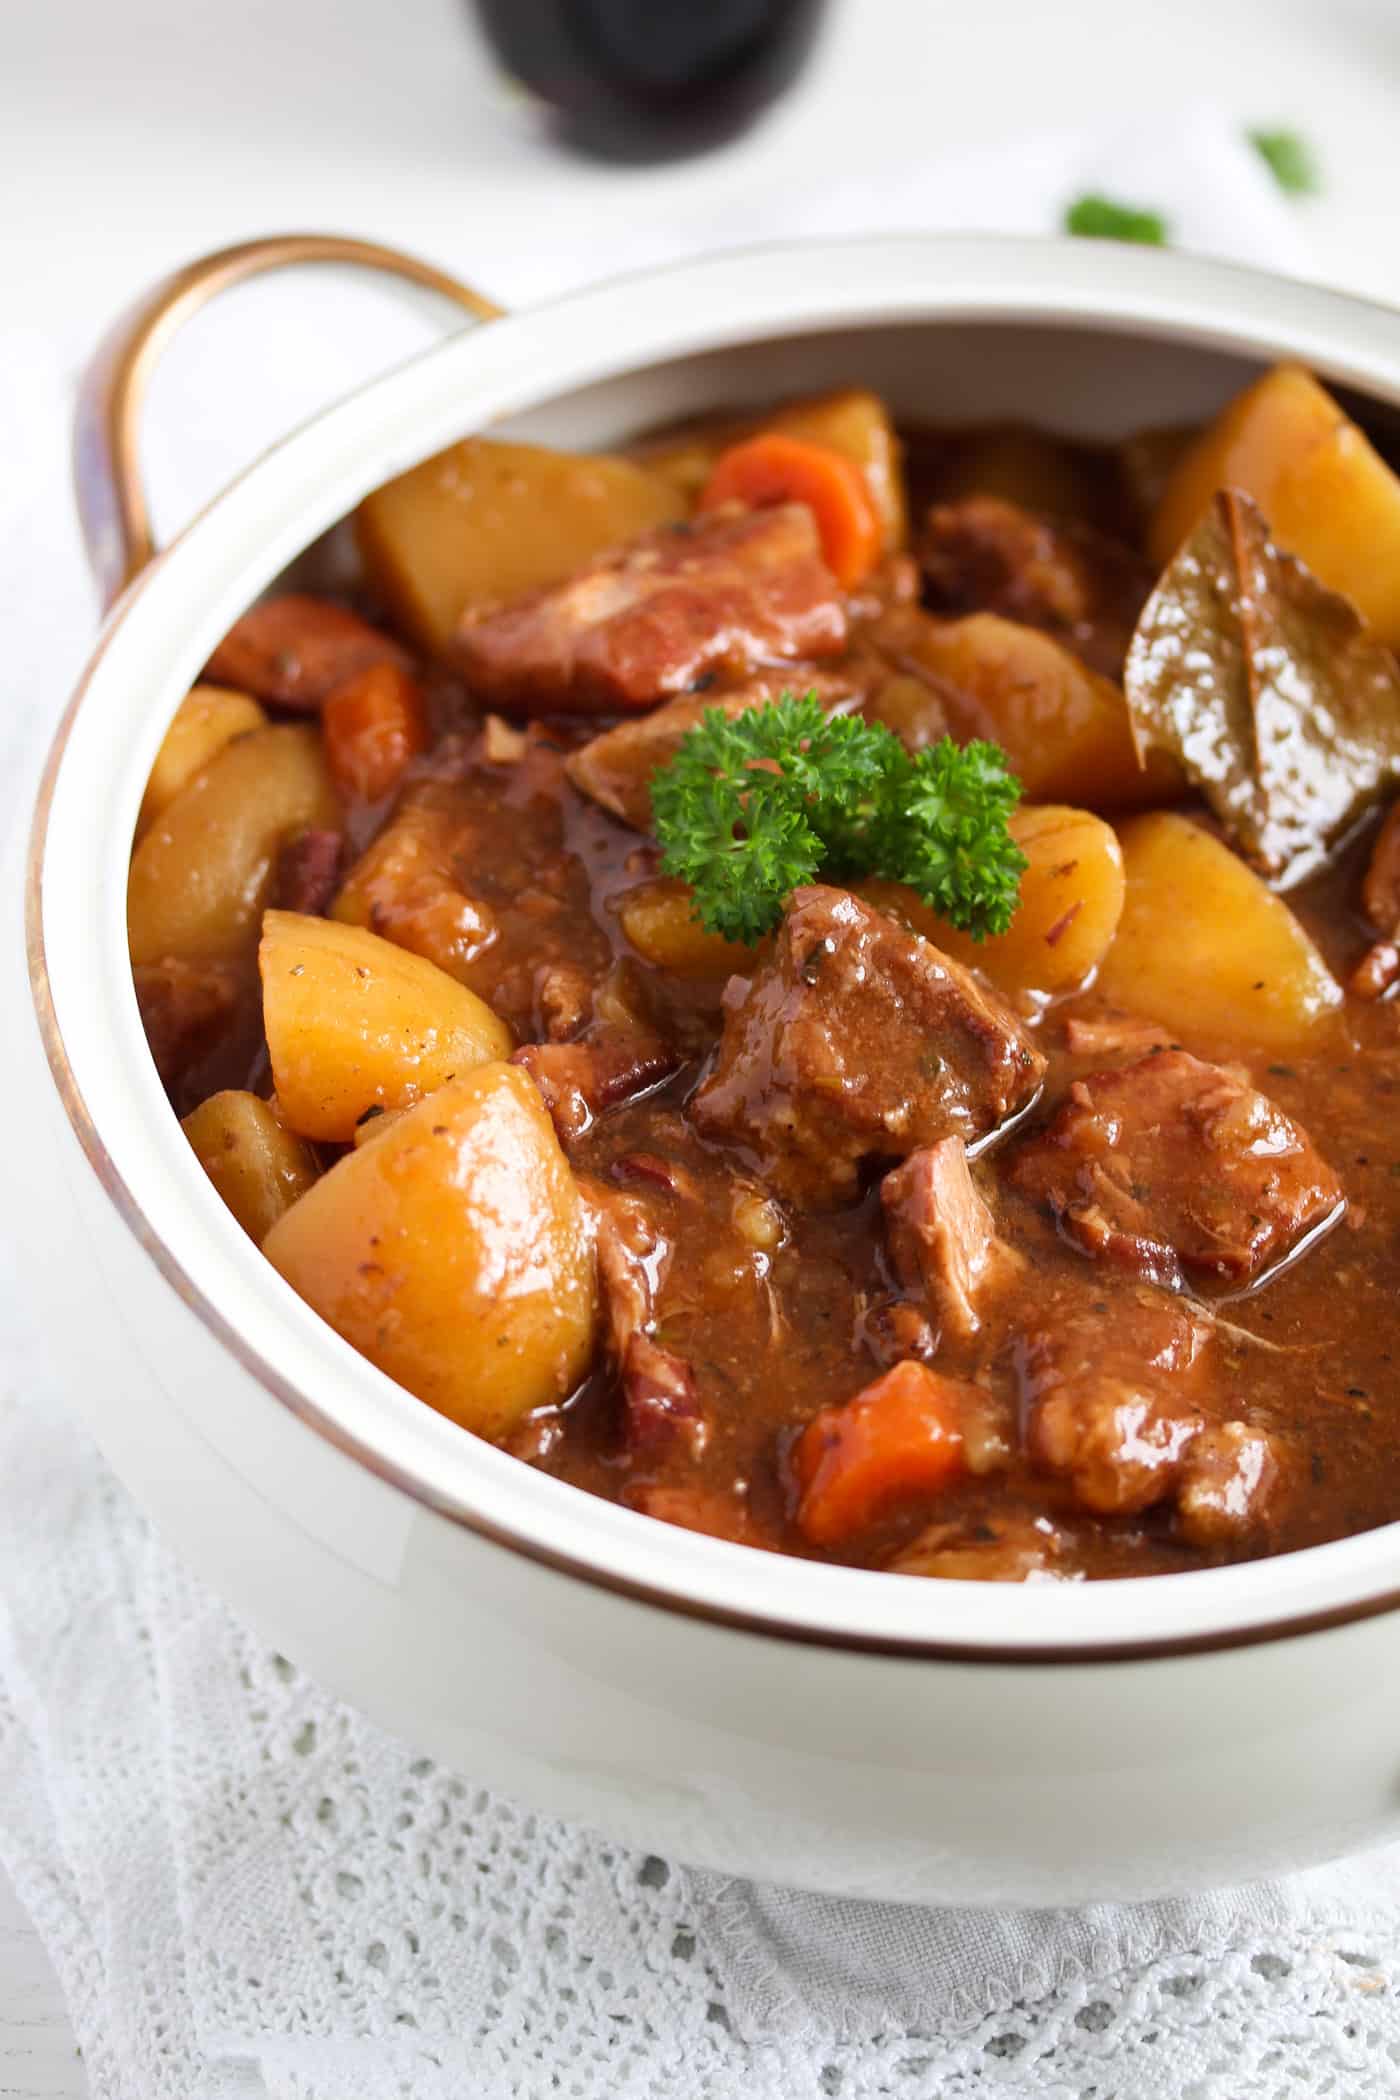 lamb stew with potatoes in a vintage pot.